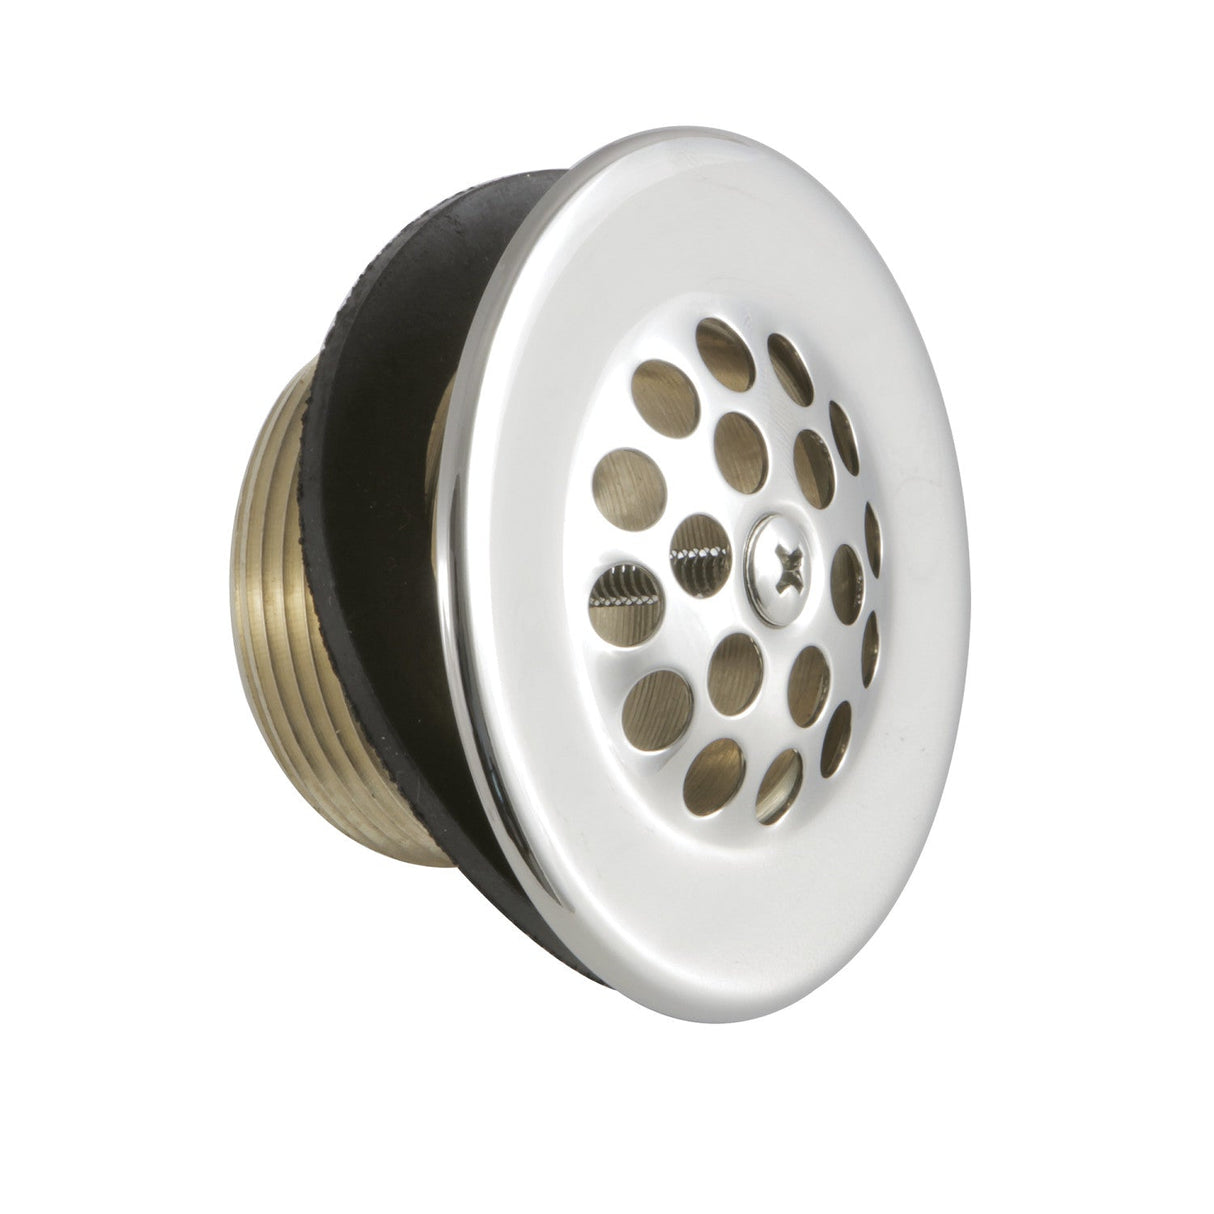 Made To Match DTL206 Brass Tub Strainer Drain, Polished Nickel